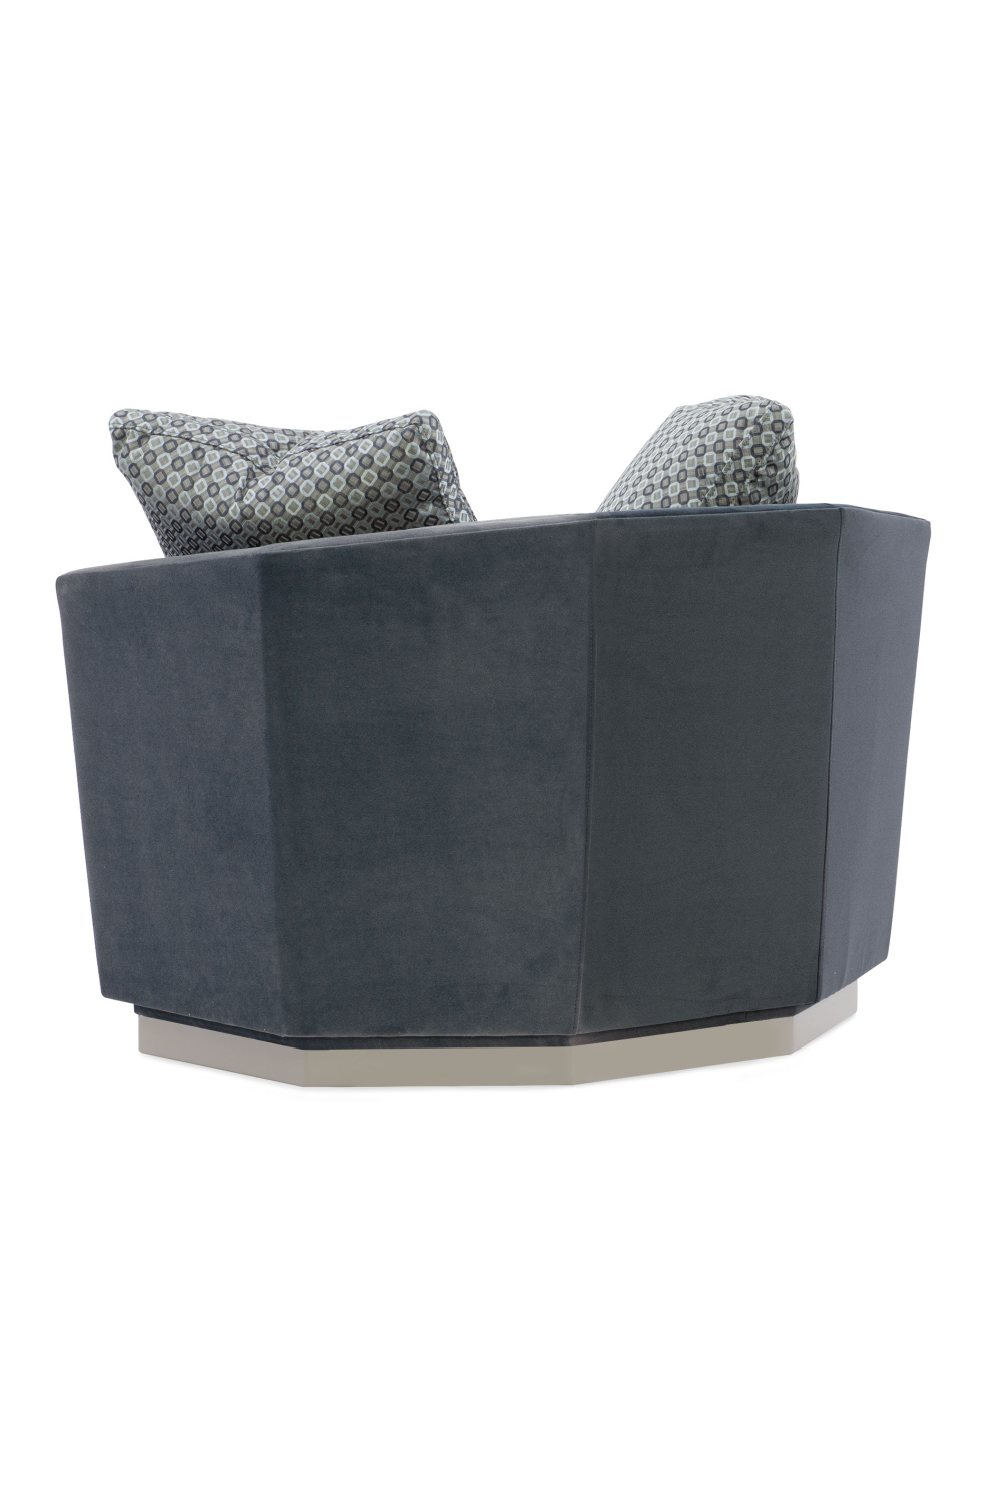 Octagonal Swivel Chair | Caracole Expressions | Oroa.com